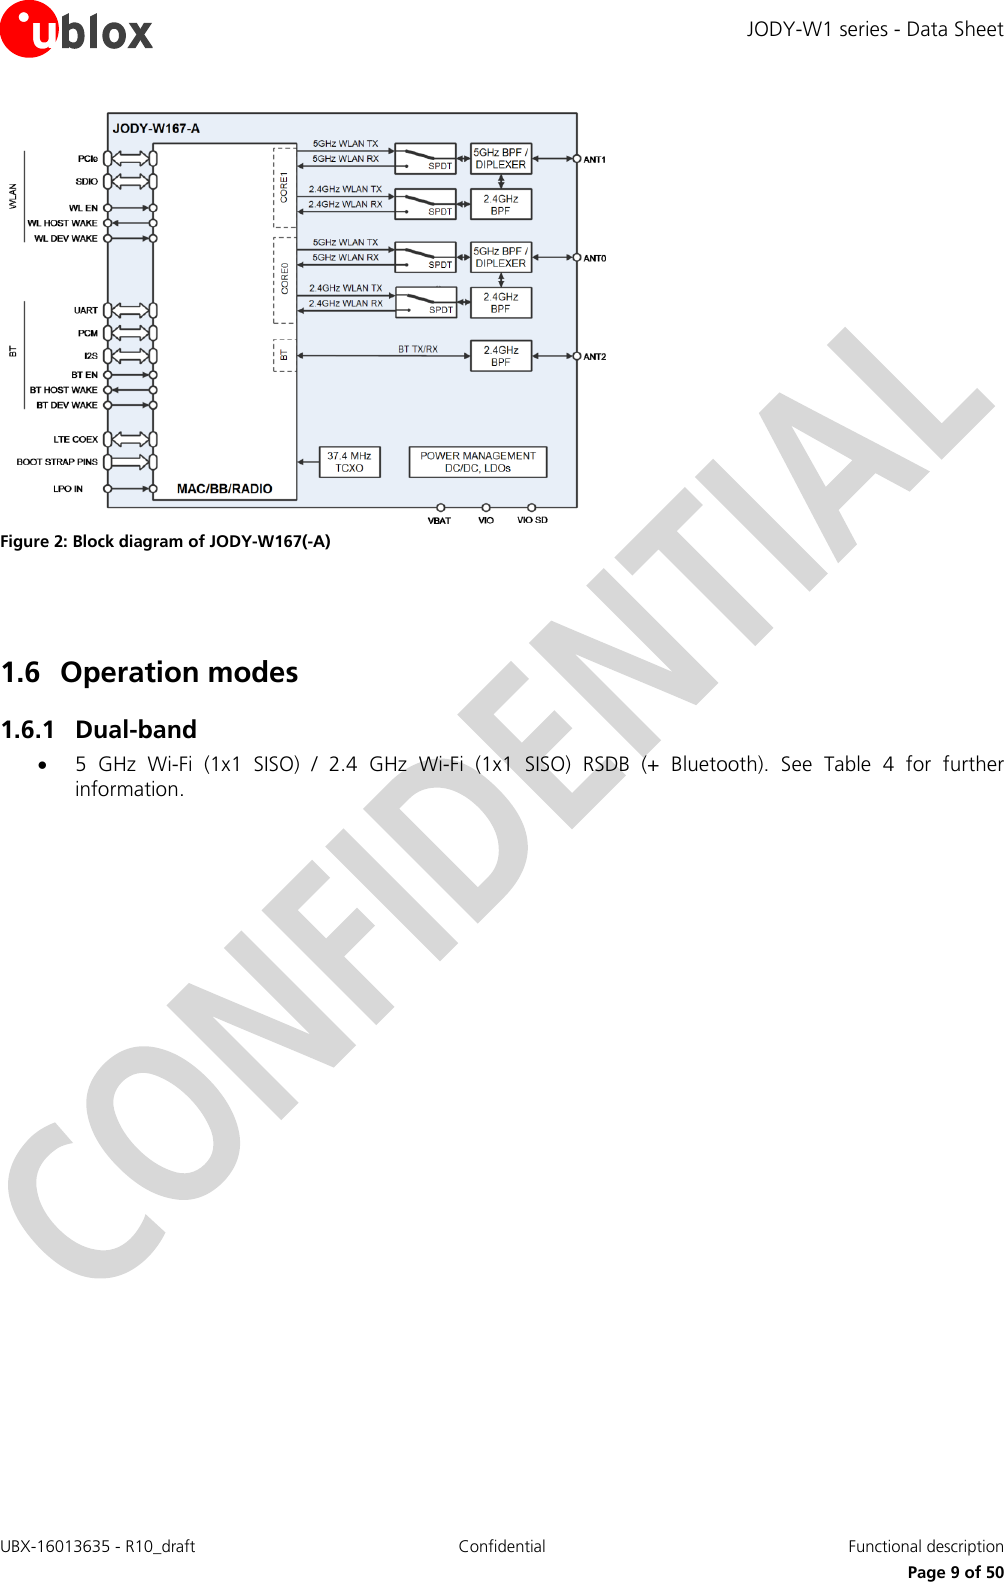 JODY-W1 series - Data Sheet UBX-16013635 - R10_draft Confidential  Functional description     Page 9 of 50  Figure 2: Block diagram of JODY-W167(-A)    1.6 Operation modes 1.6.1 Dual-band  5  GHz Wi-Fi  (1x1  SISO)  /  2.4  GHz  Wi-Fi  (1x1  SISO)  RSDB  (+  Bluetooth).  See  Table  4  for  further information.  